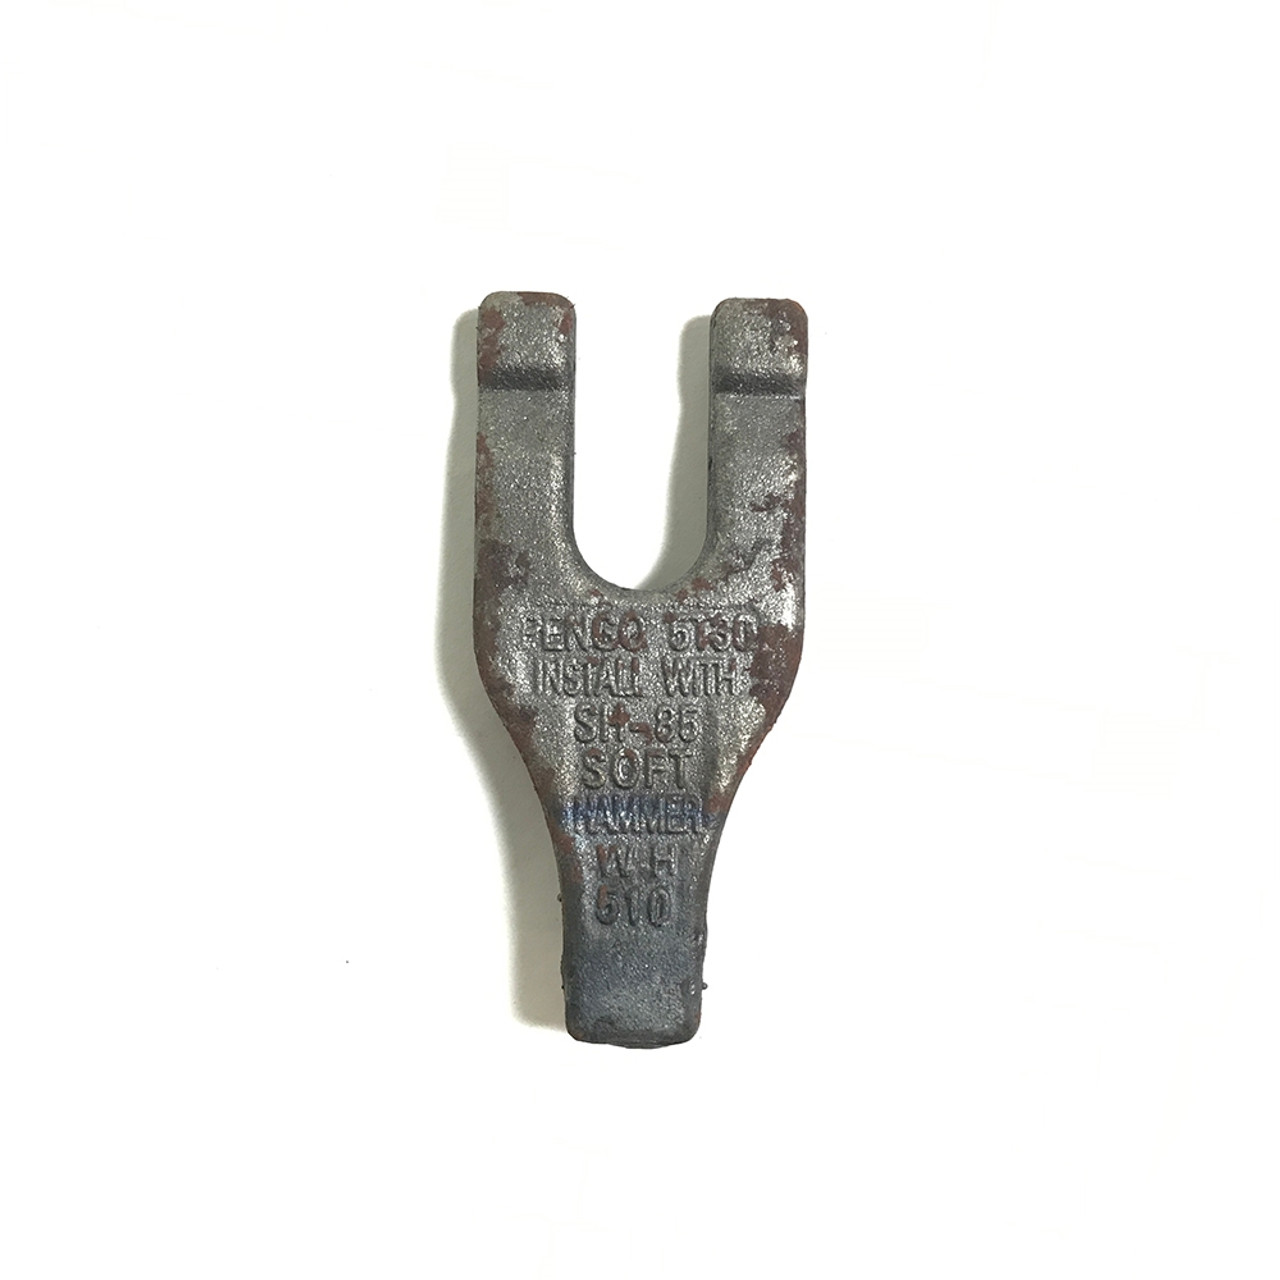 5T30-HF CHISEL TOOTH HF 1 SIDE